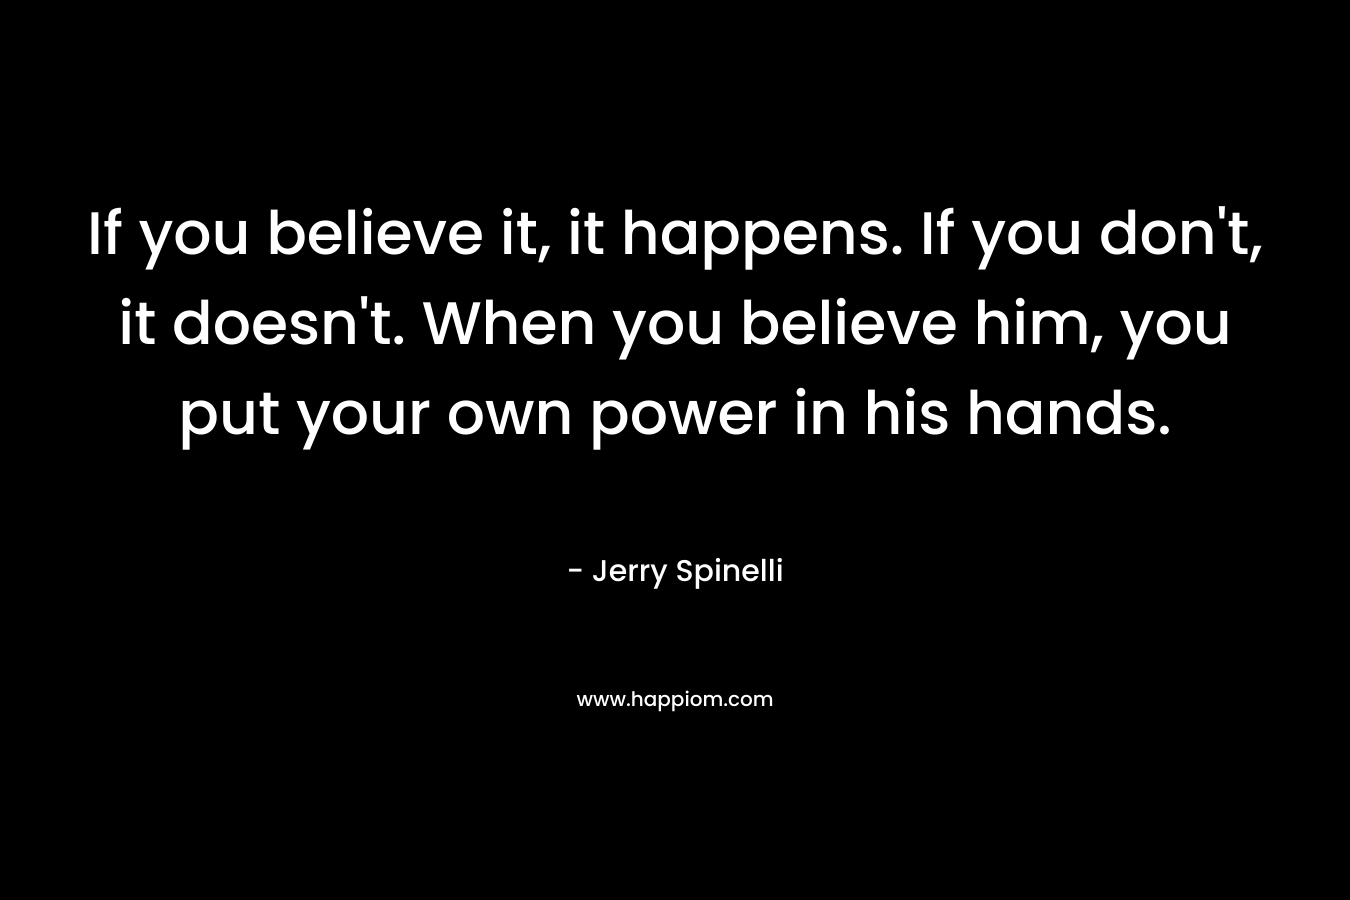 If you believe it, it happens. If you don’t, it doesn’t. When you believe him, you put your own power in his hands. – Jerry Spinelli